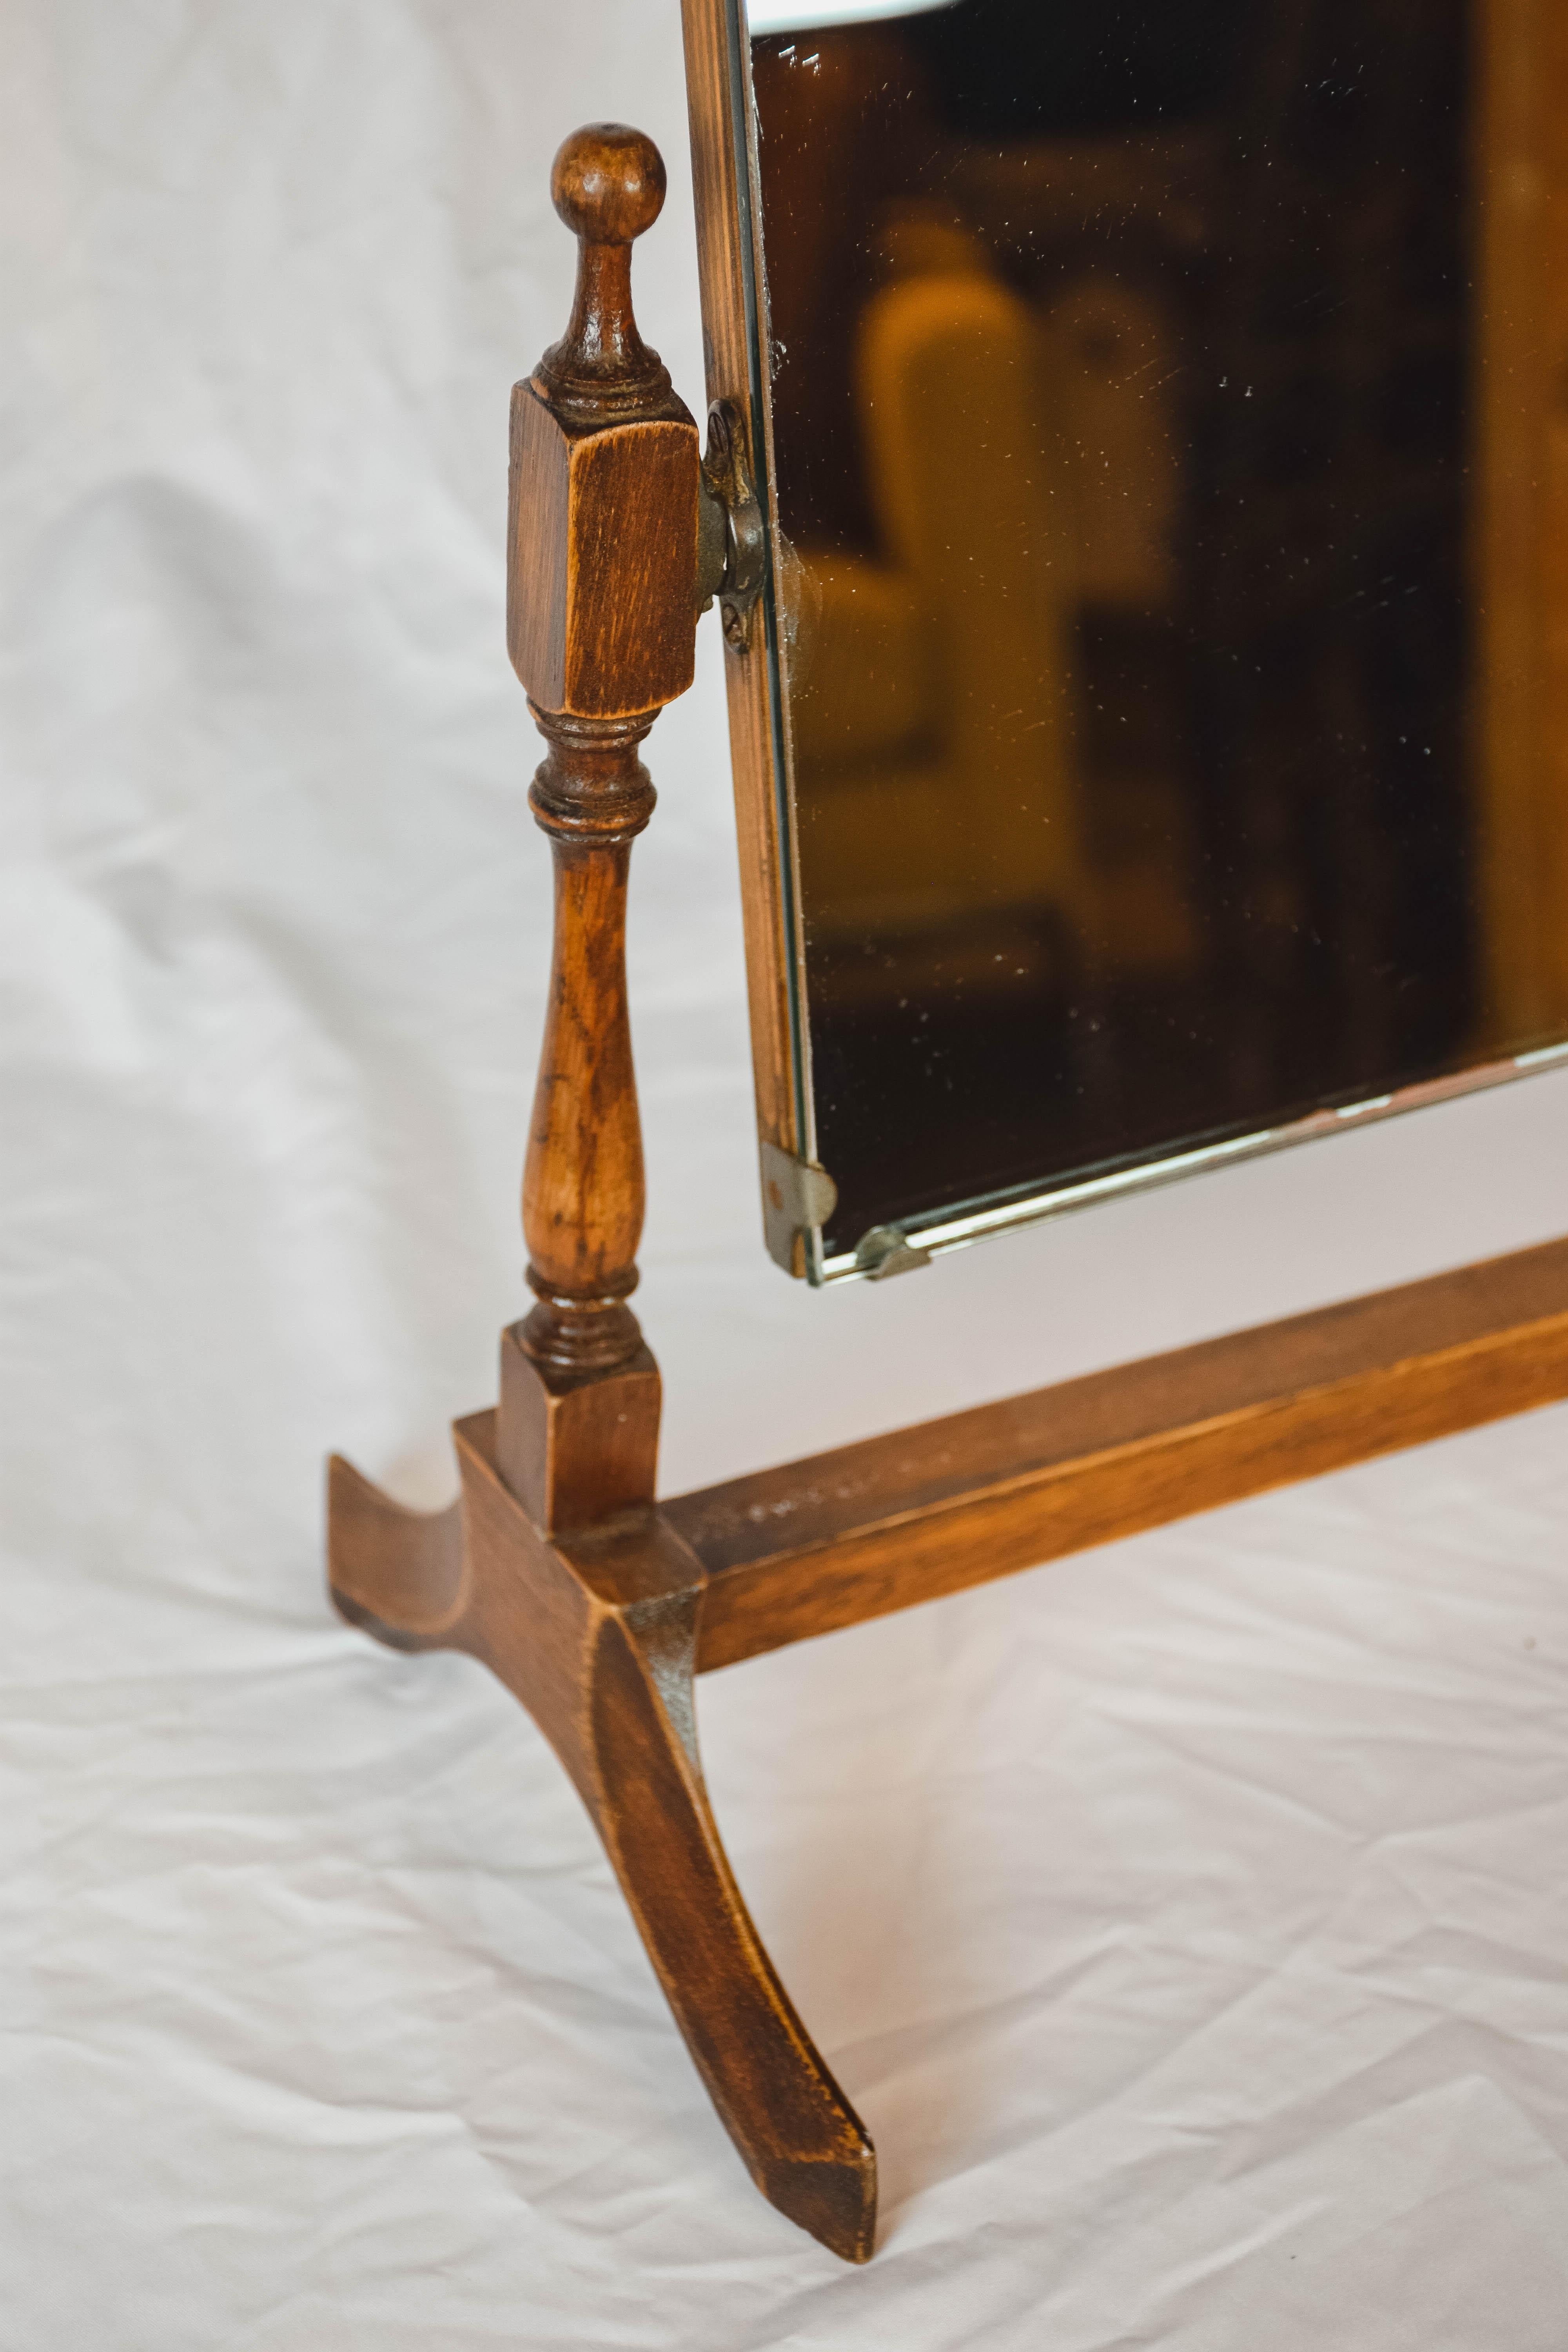 Antique English oak gentleman's dressing / shaving mirror. Made from oak with a beveled wooden frame. The mirror is detachable and tilts for ease of use. This would make a lovely addition to a dresser or dressing area. Wood backing protects the